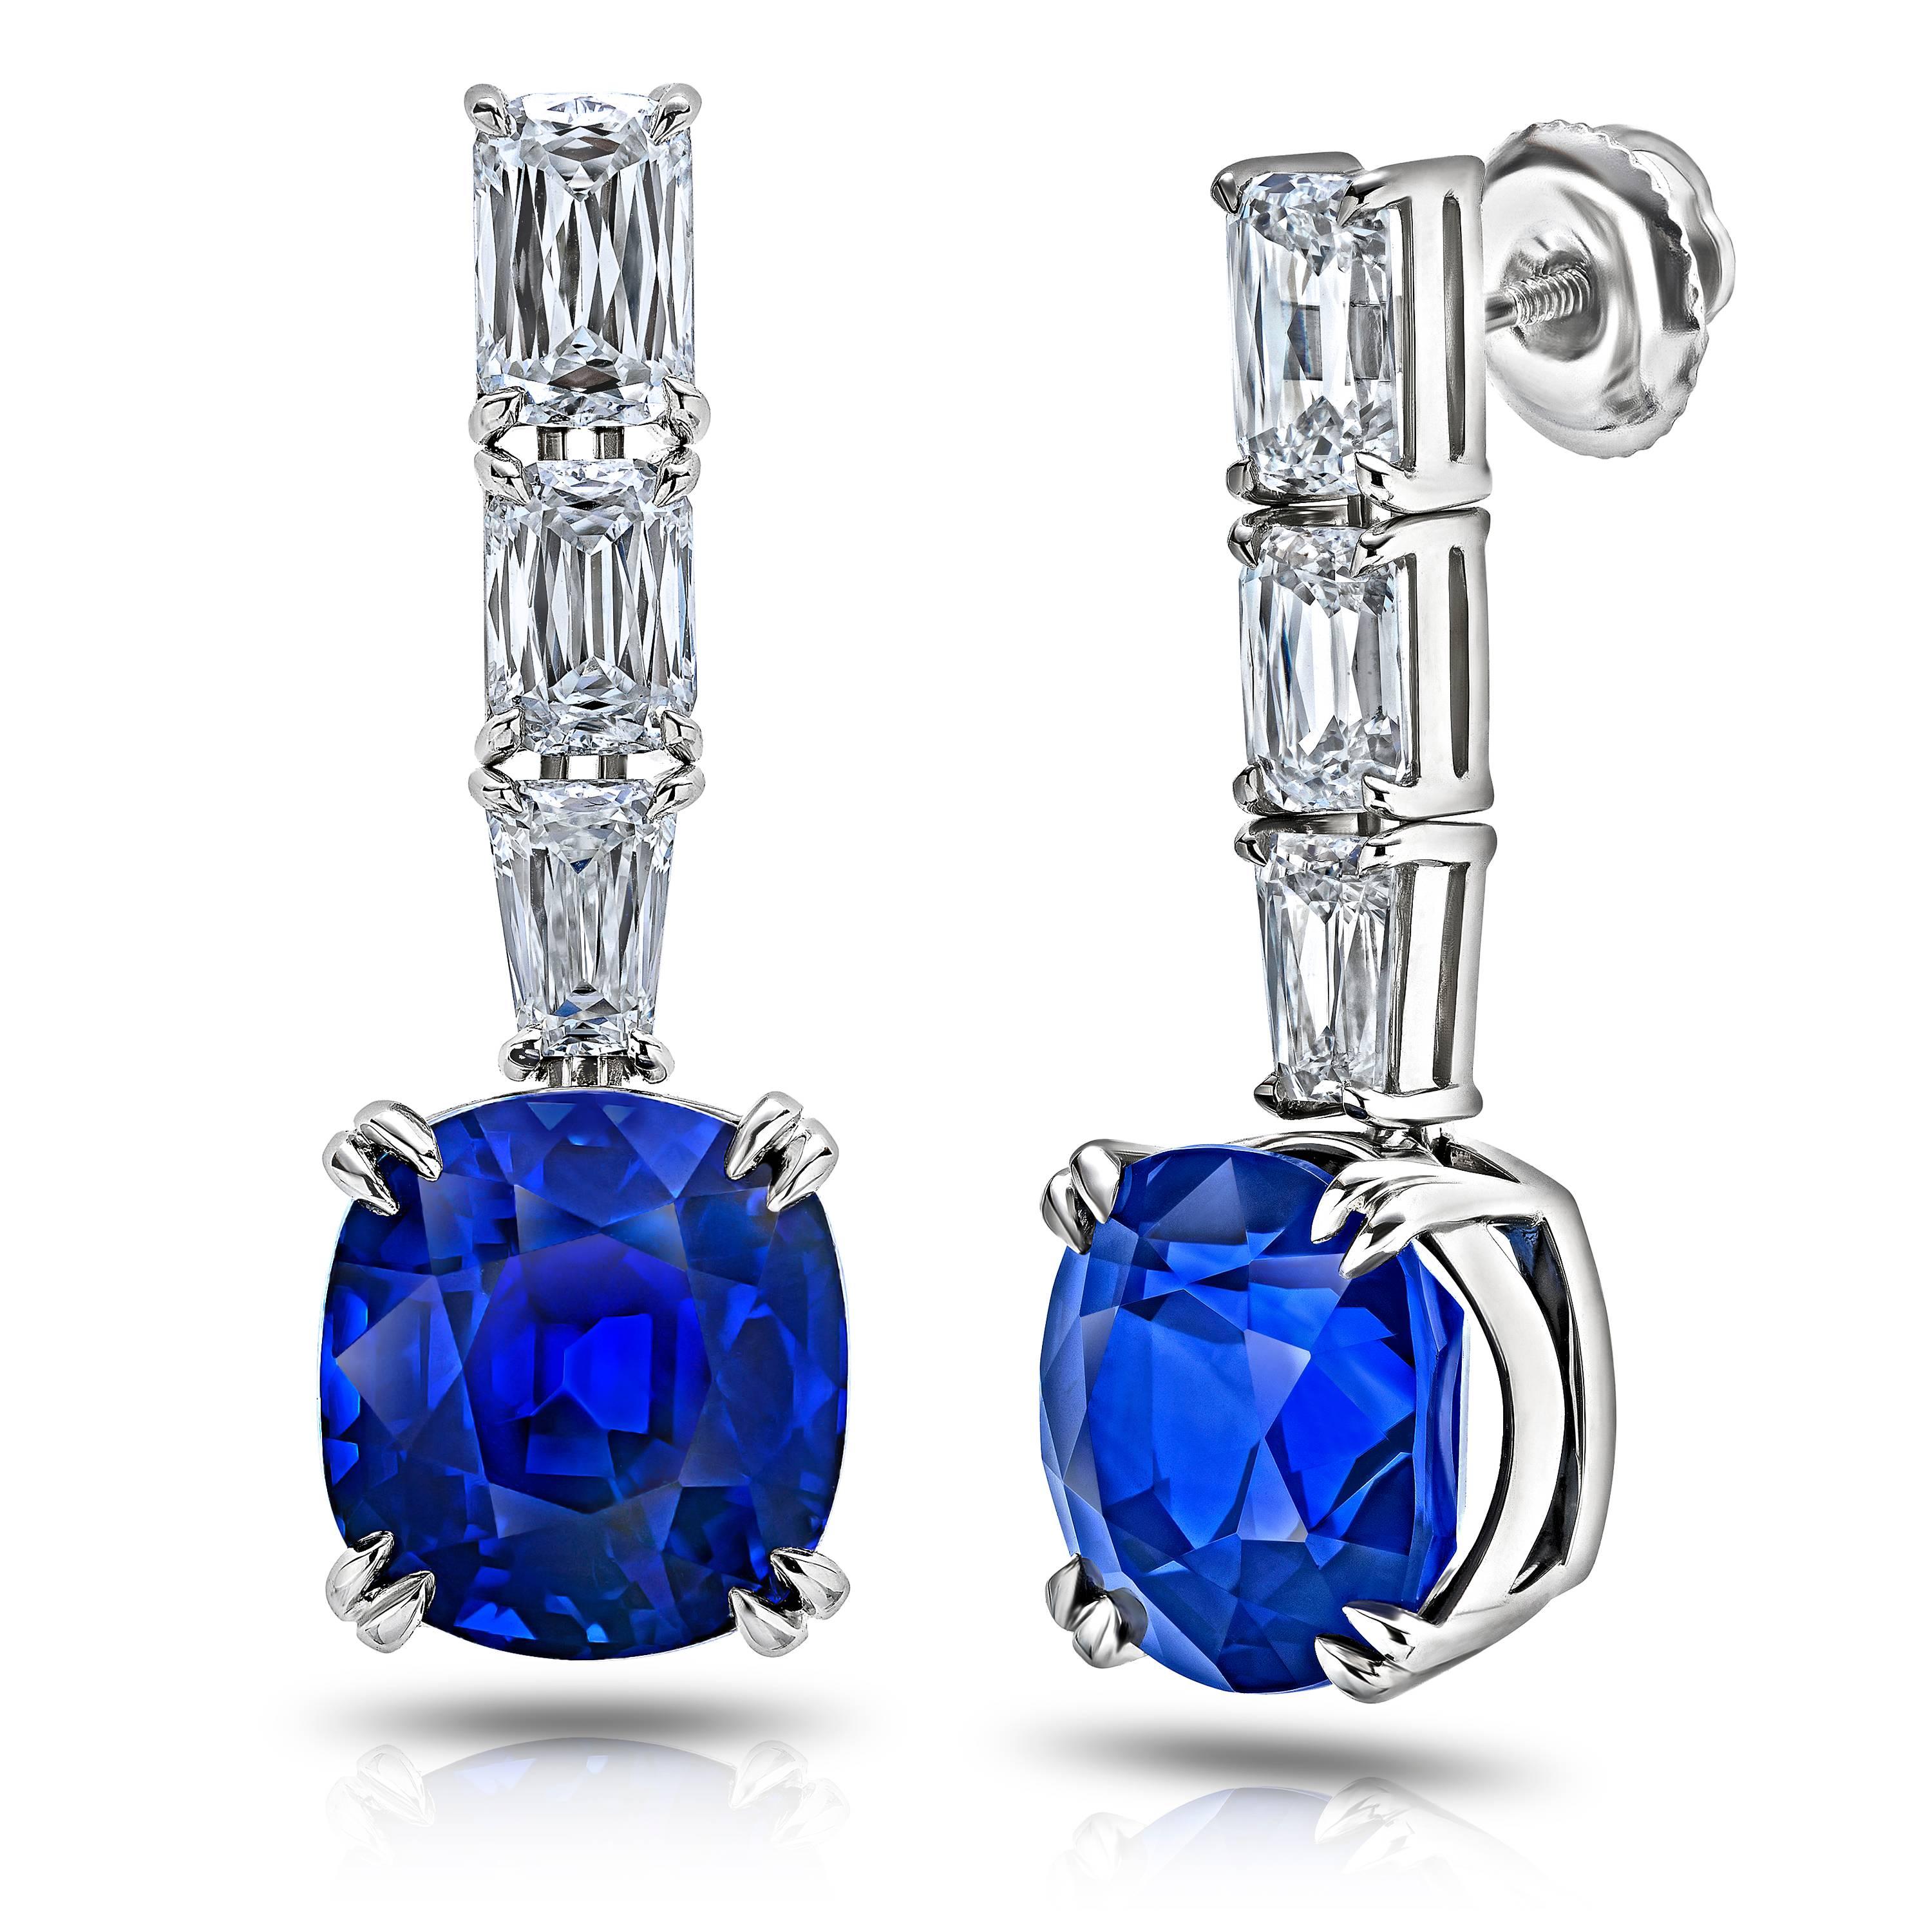 Blue Sapphire and Diamond Drop Earrings, with a total Sapphire weight of 11.94 carats and 2.45 carats of Diamonds set on platinum screw backs